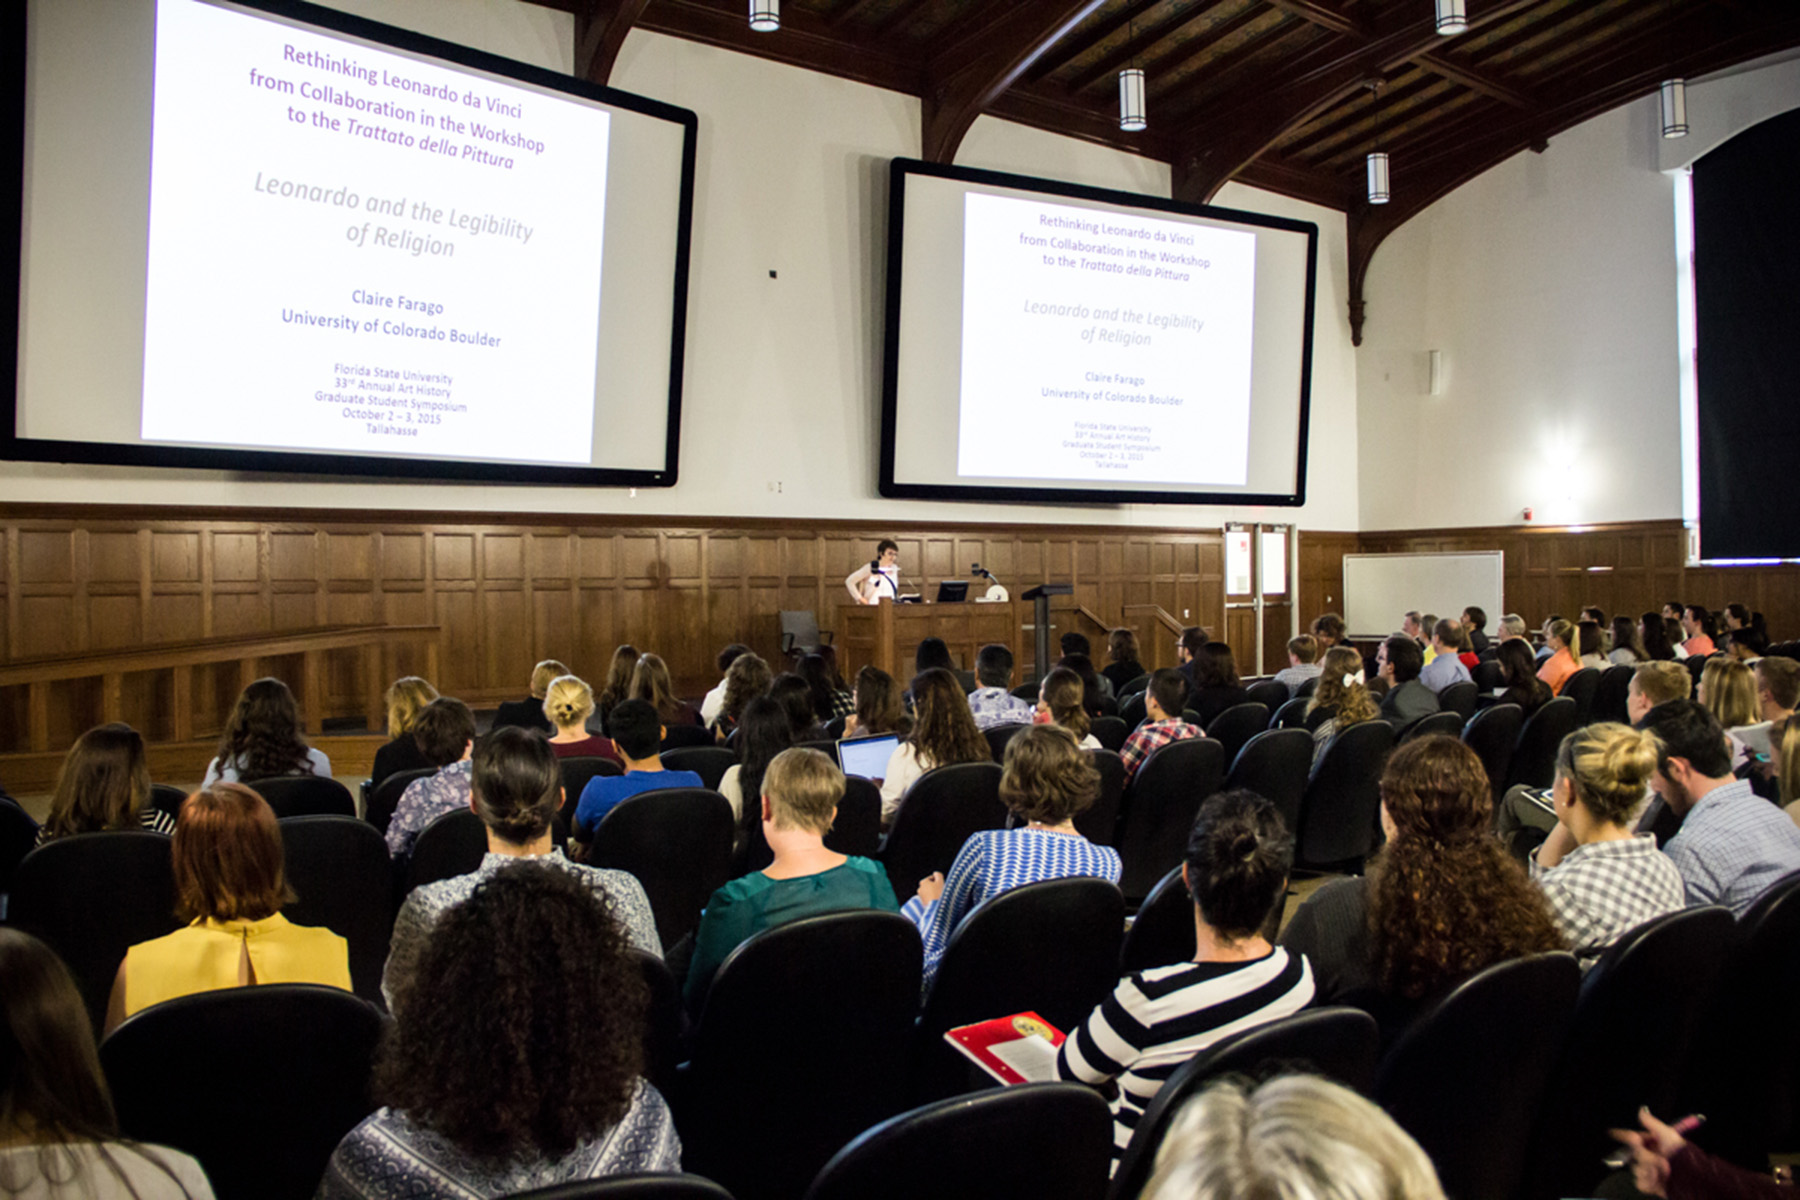 Claire Farago from the University of Colorado Boulder speaks during the 36th Annual Graduate Student Symposium to attendees, March 2019.